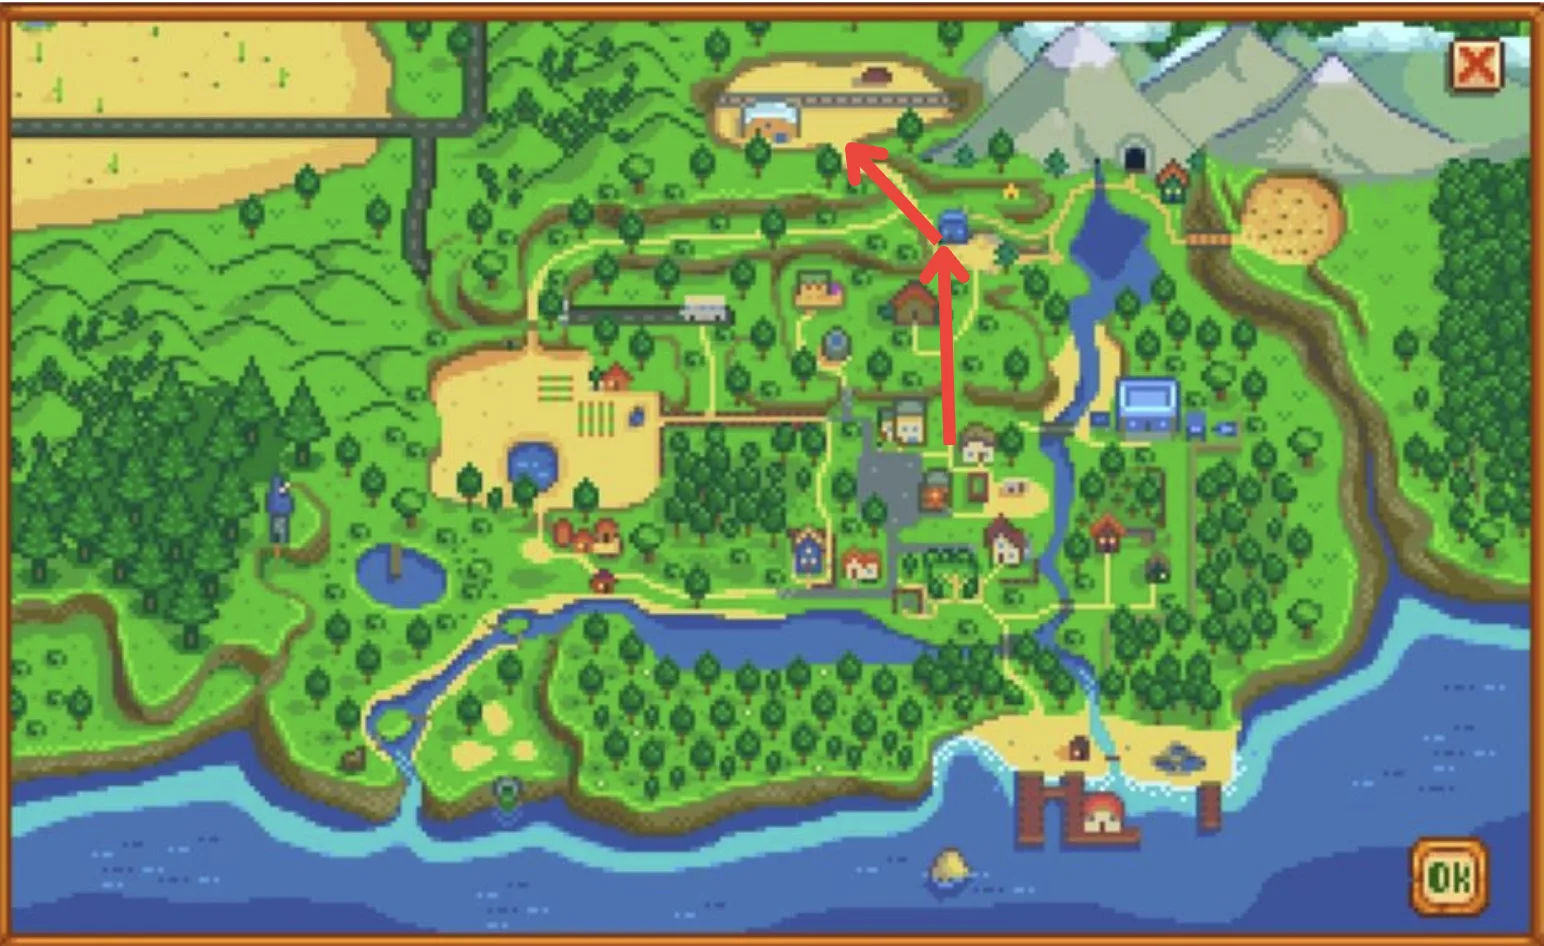 Route with Arrows from Stardew Valley Township to Railroad Area